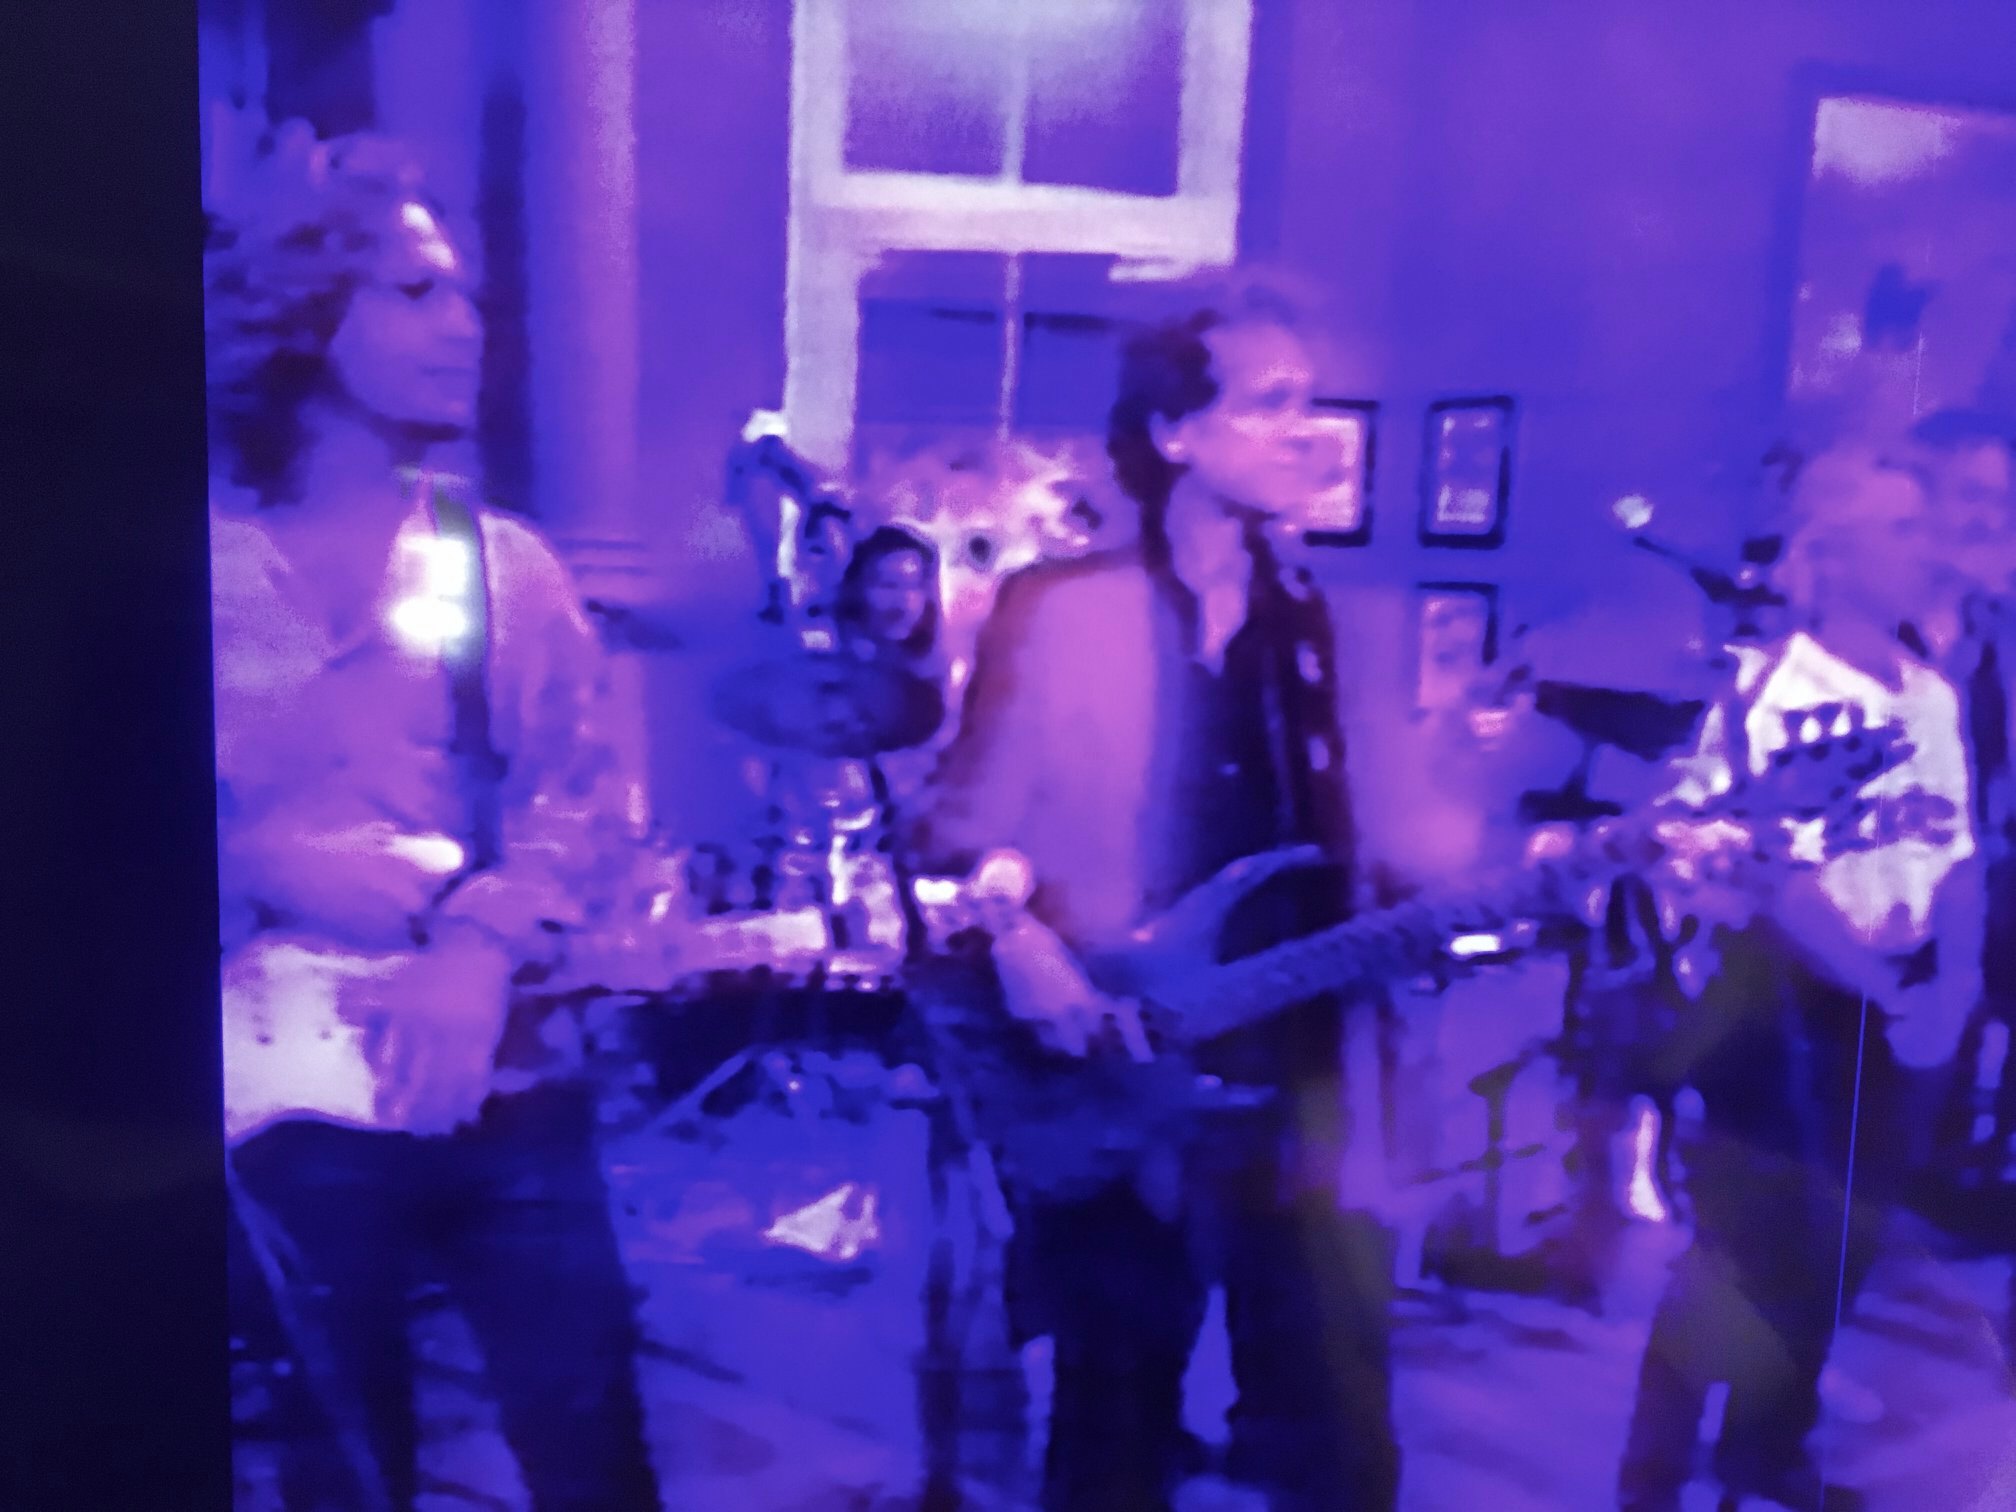 Kurt Griffey, Ron Wikso, Nick St. Nicholas, Fergie Frederiksen, and Denny Laine - on the Regis and Kathie Lee Show